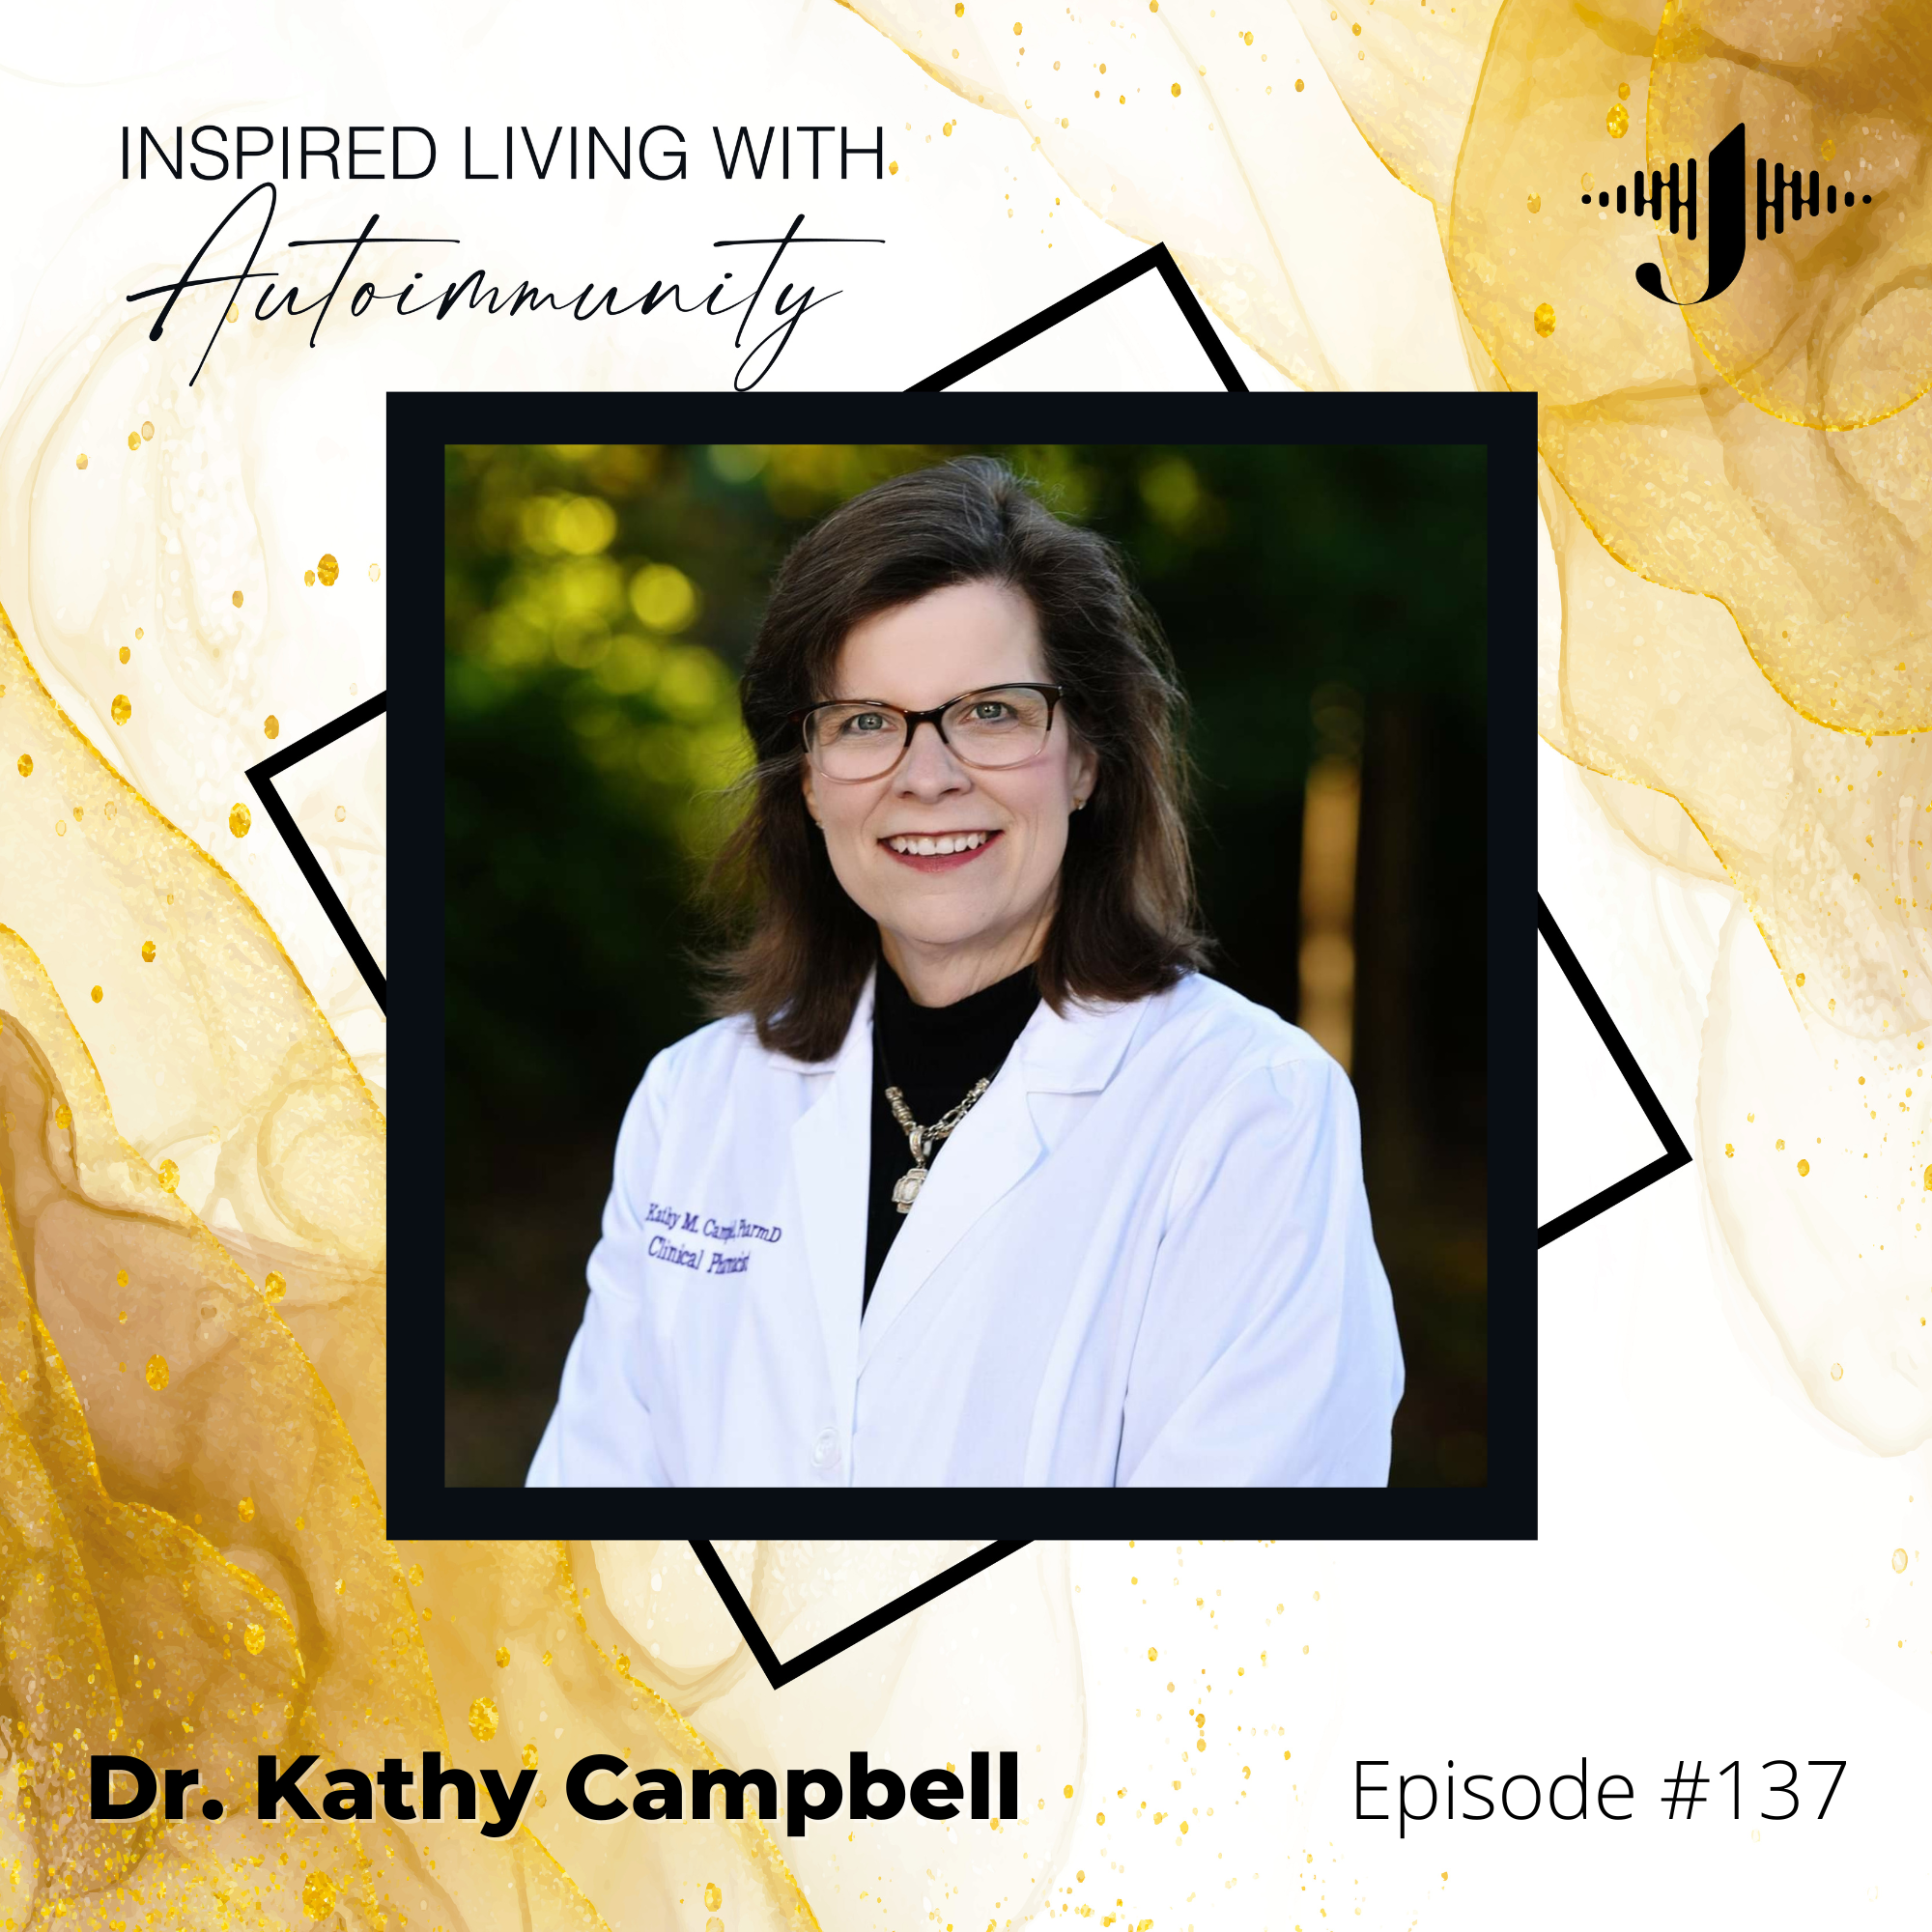 Dr. Kathy Campbell: A Pharmacist's Role in Supporting Autoimmune Health